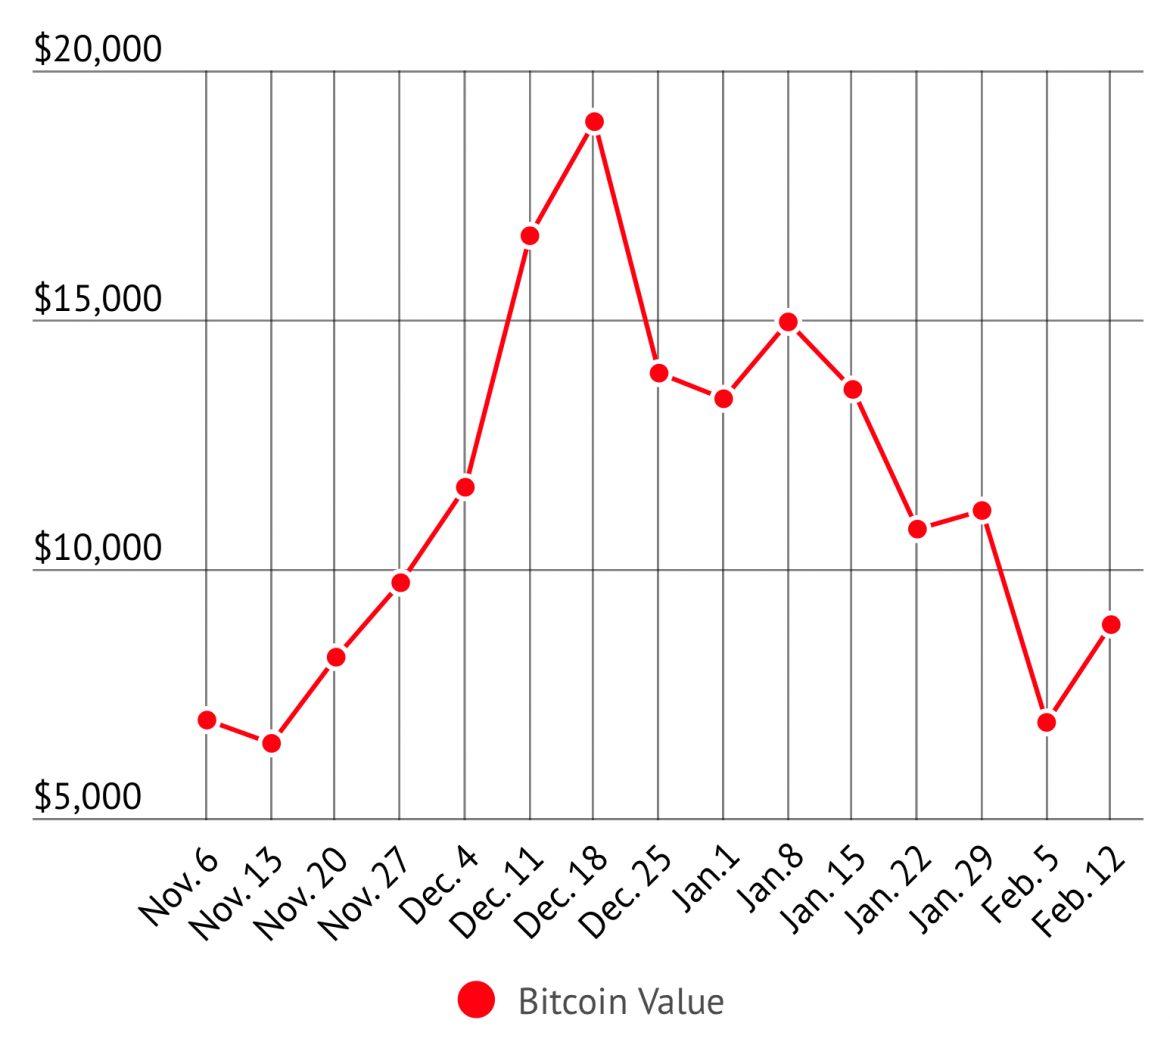 graph+showing+the+value+of+bitcoin+fluctuating+from+Nov+6+to+Feb+12